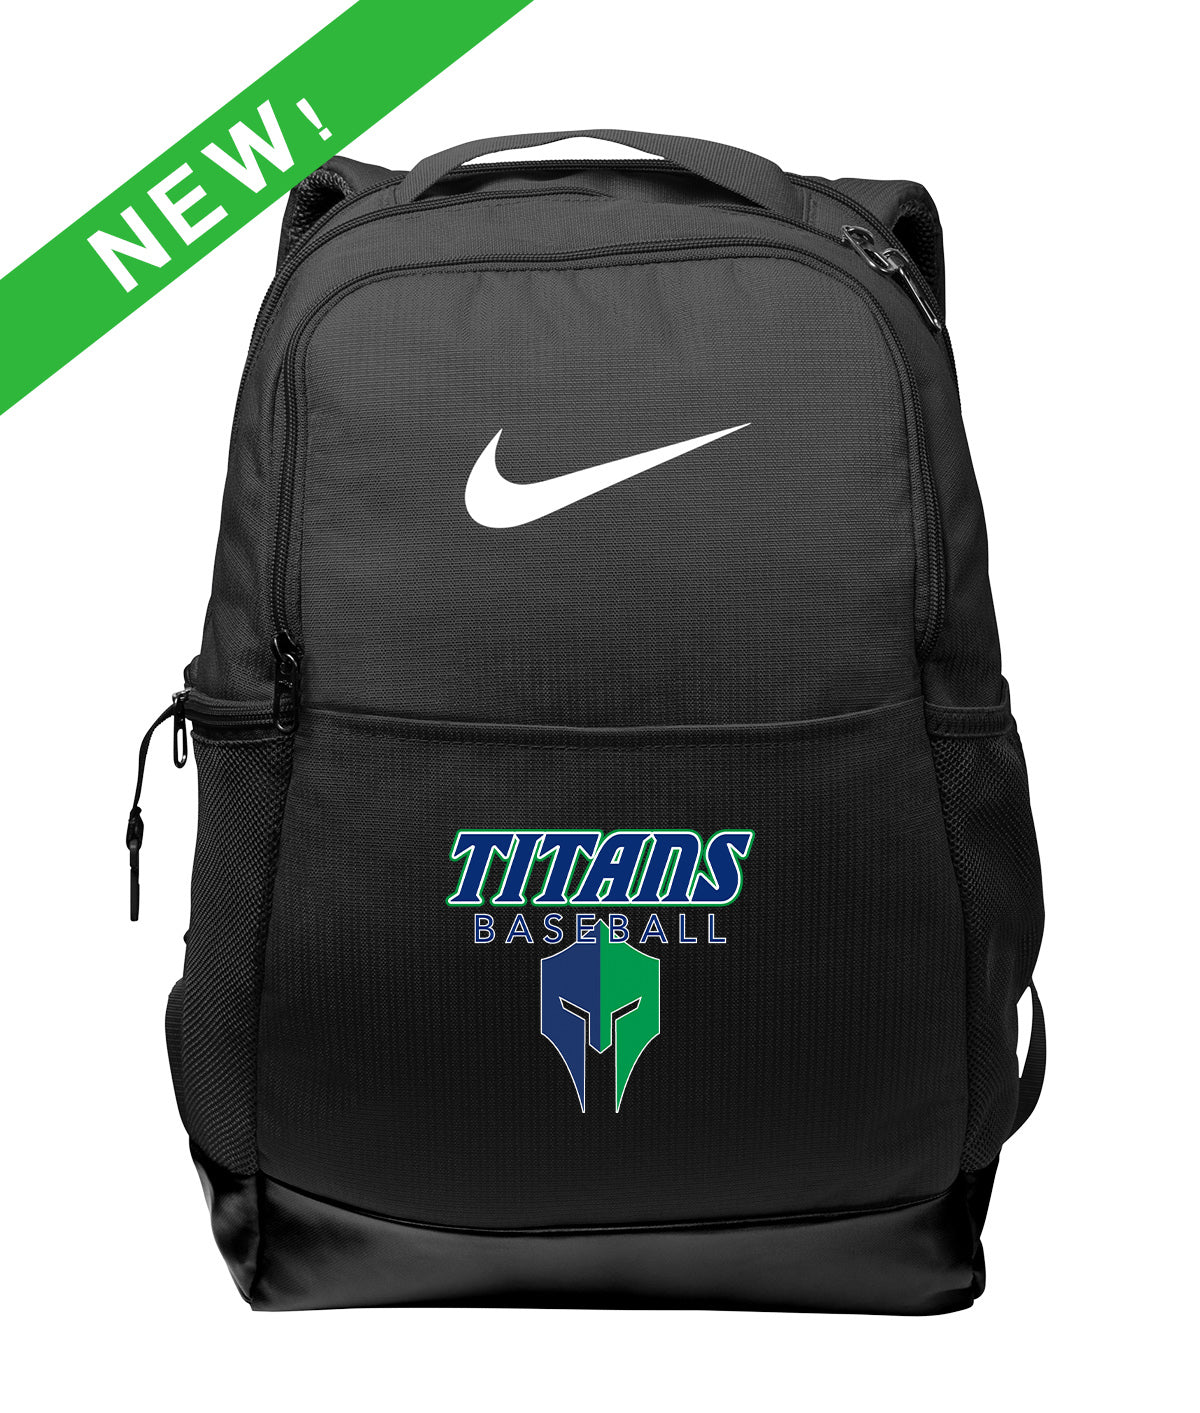 Titans Nike Backpack - NKDH7709 (color options available)